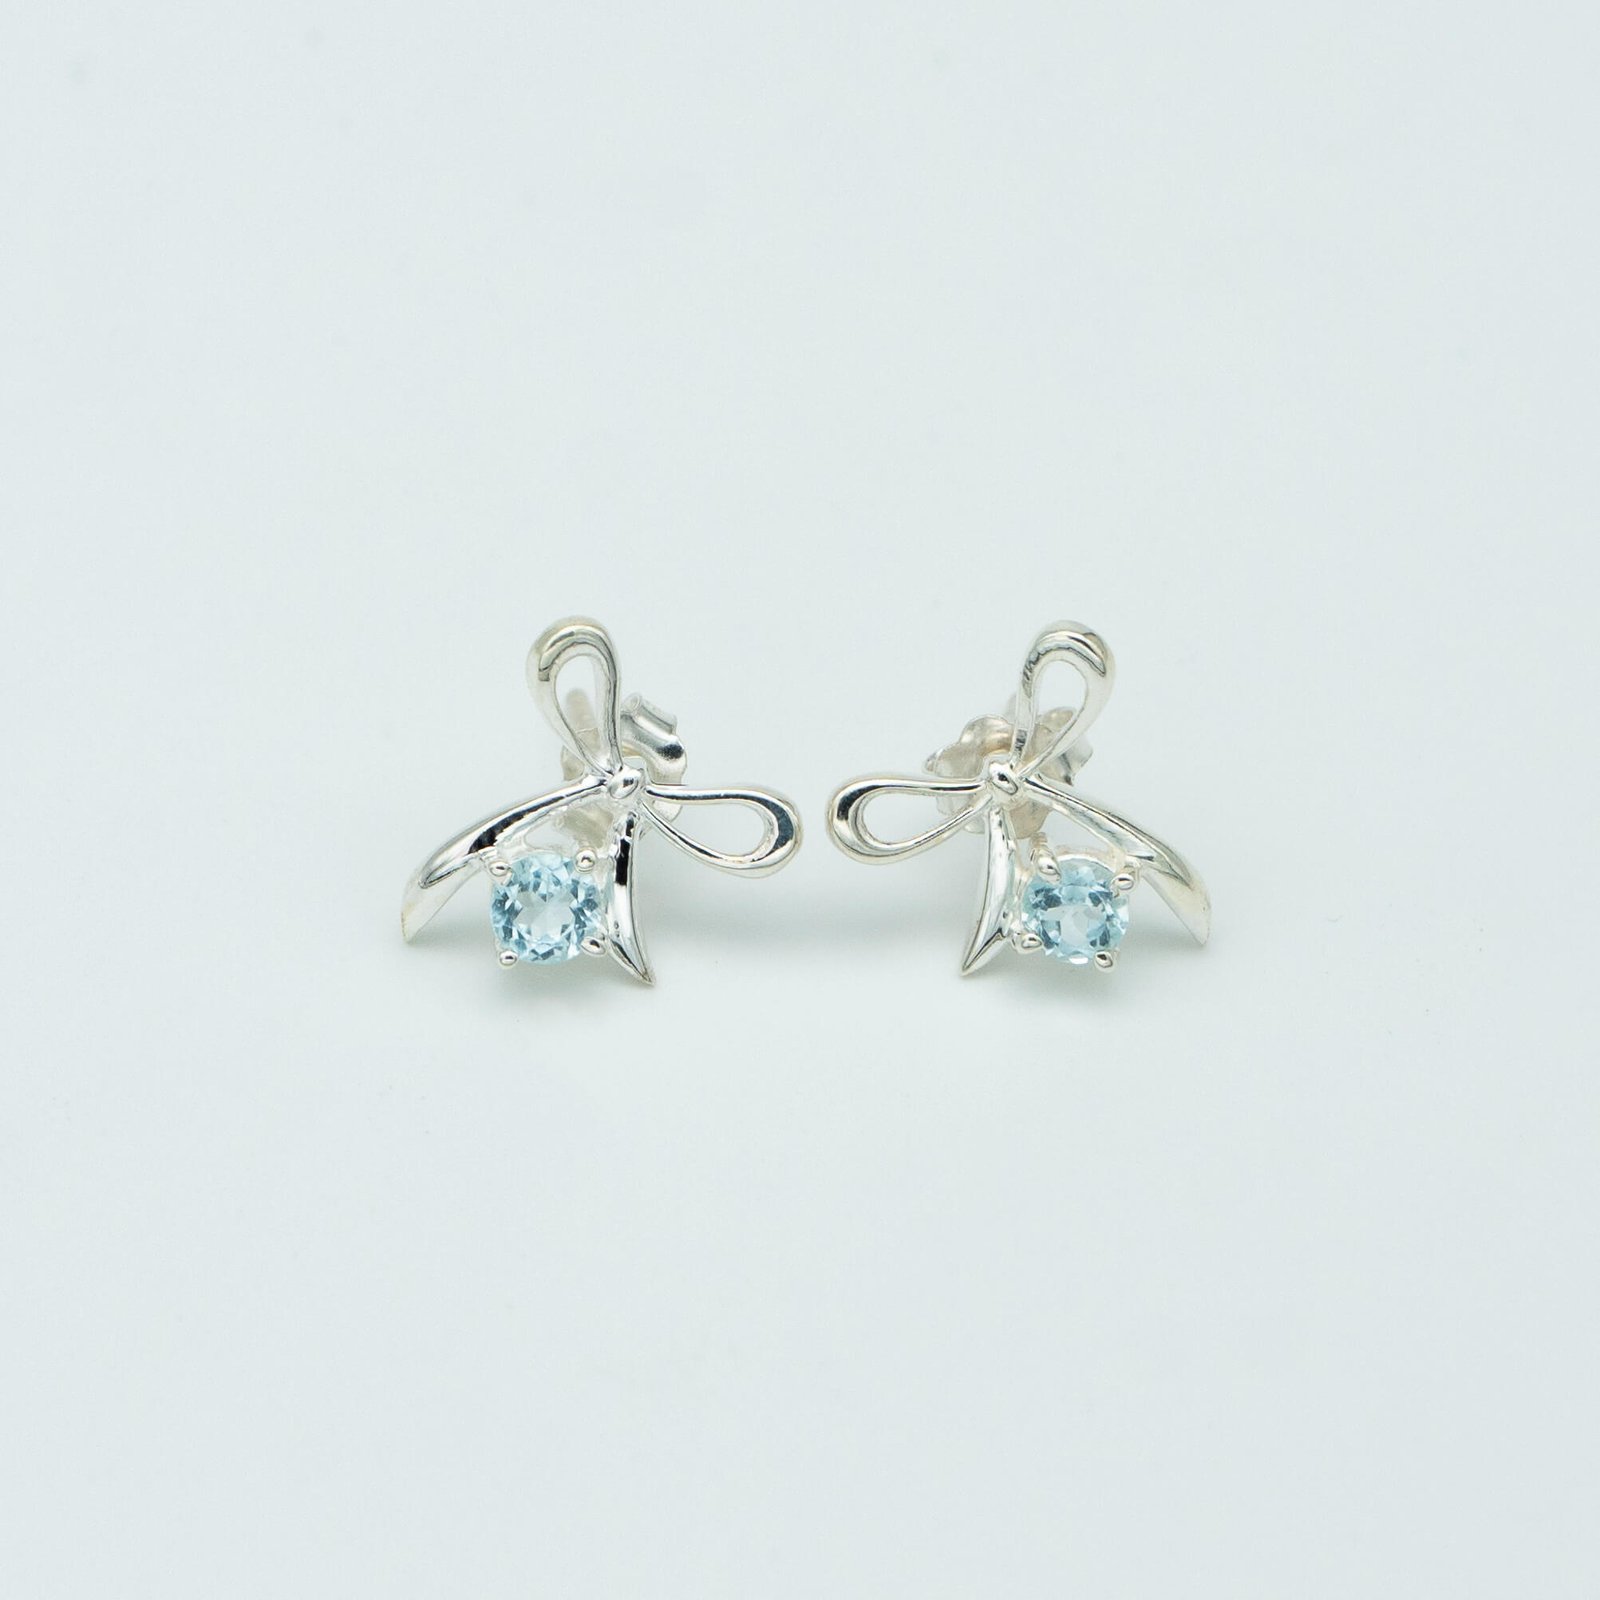 925 Silver earrings – bows with dangling ribbons, two clear diamonds in the  centre, afro hook